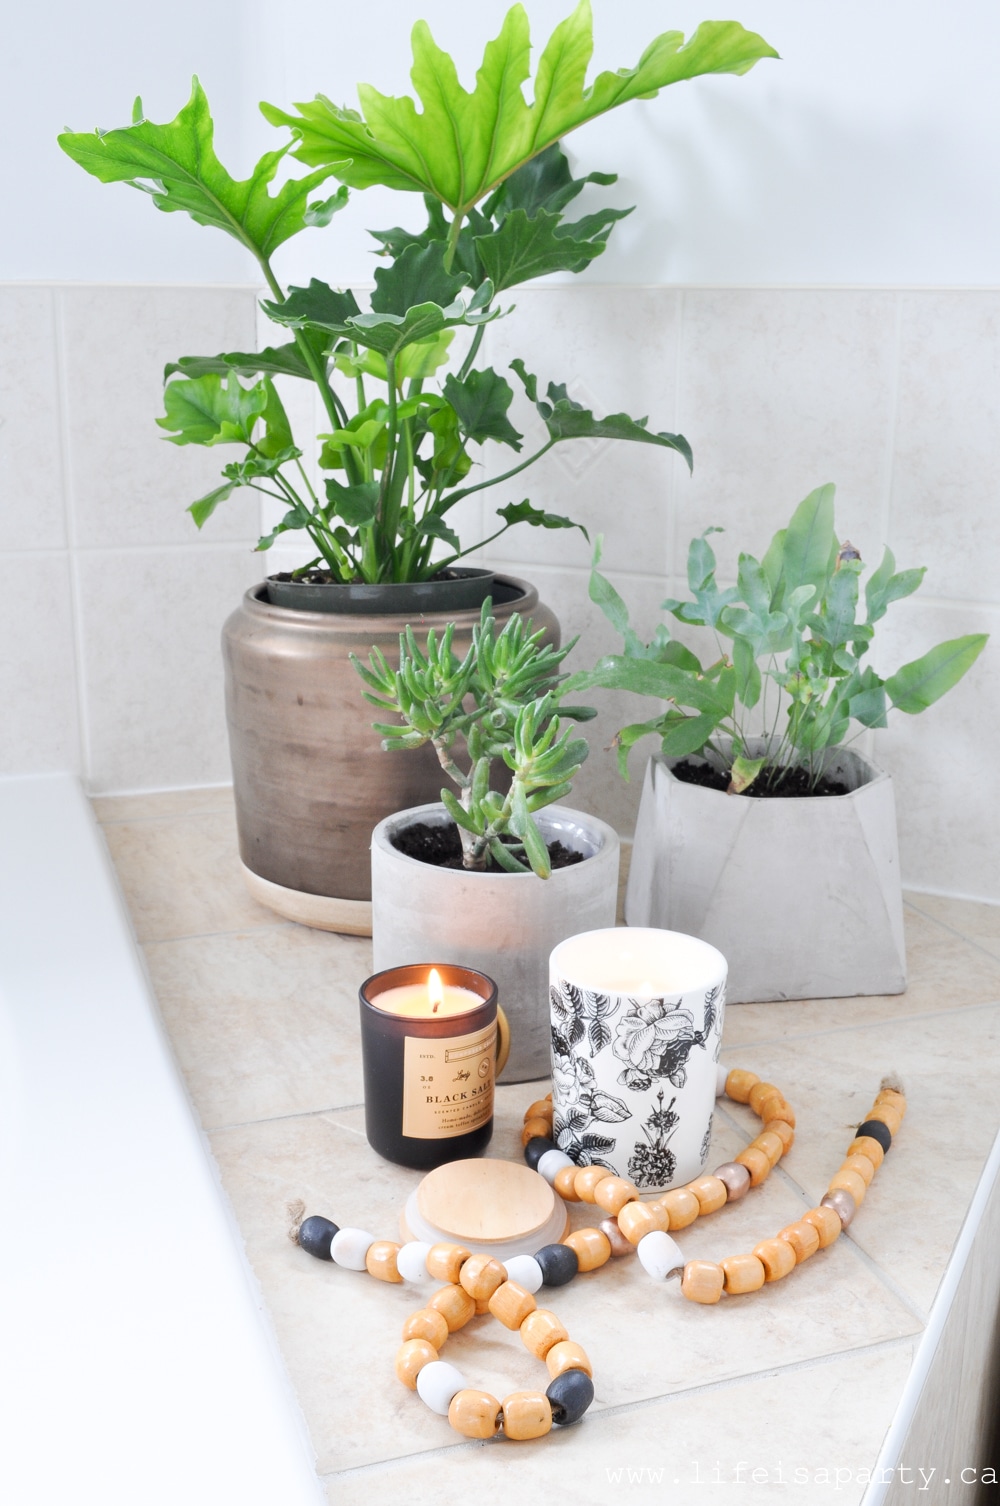 Modern Boho Bathroom Refresh -fresh white paint, a DIY tub tray, beads, candles, and lots and lots of plants turned this bathroom from boring to boho in just a few days.